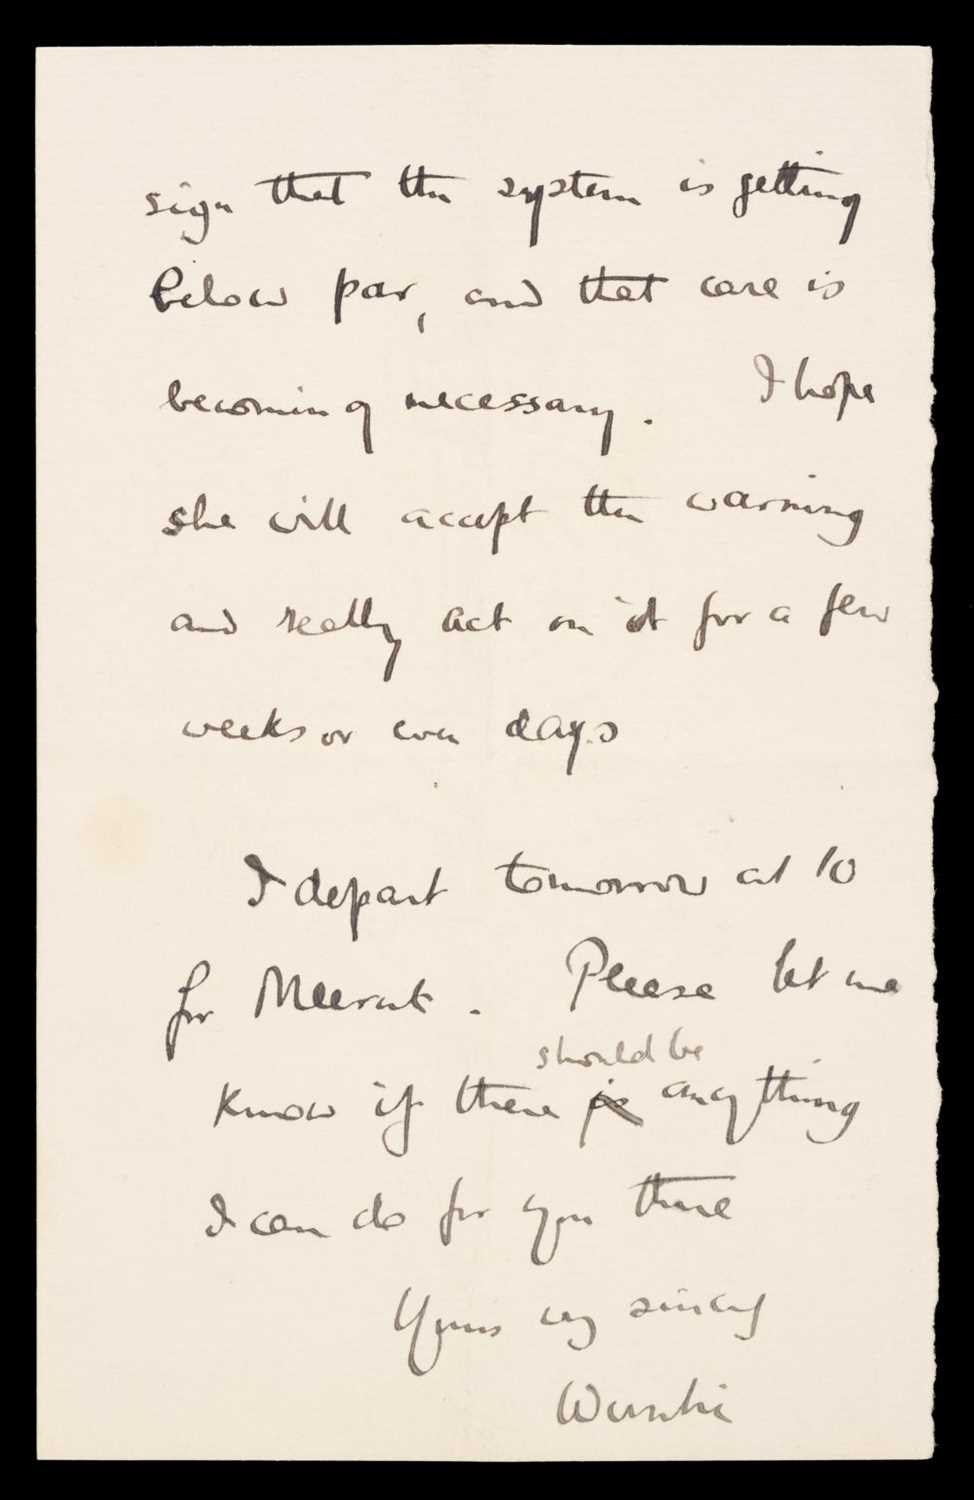 Lot 127 - Baden-Powell (Robert, 1st Baron, 1857-1941). Autograph Letter Signed, 'Wunhi', 13 October 1897